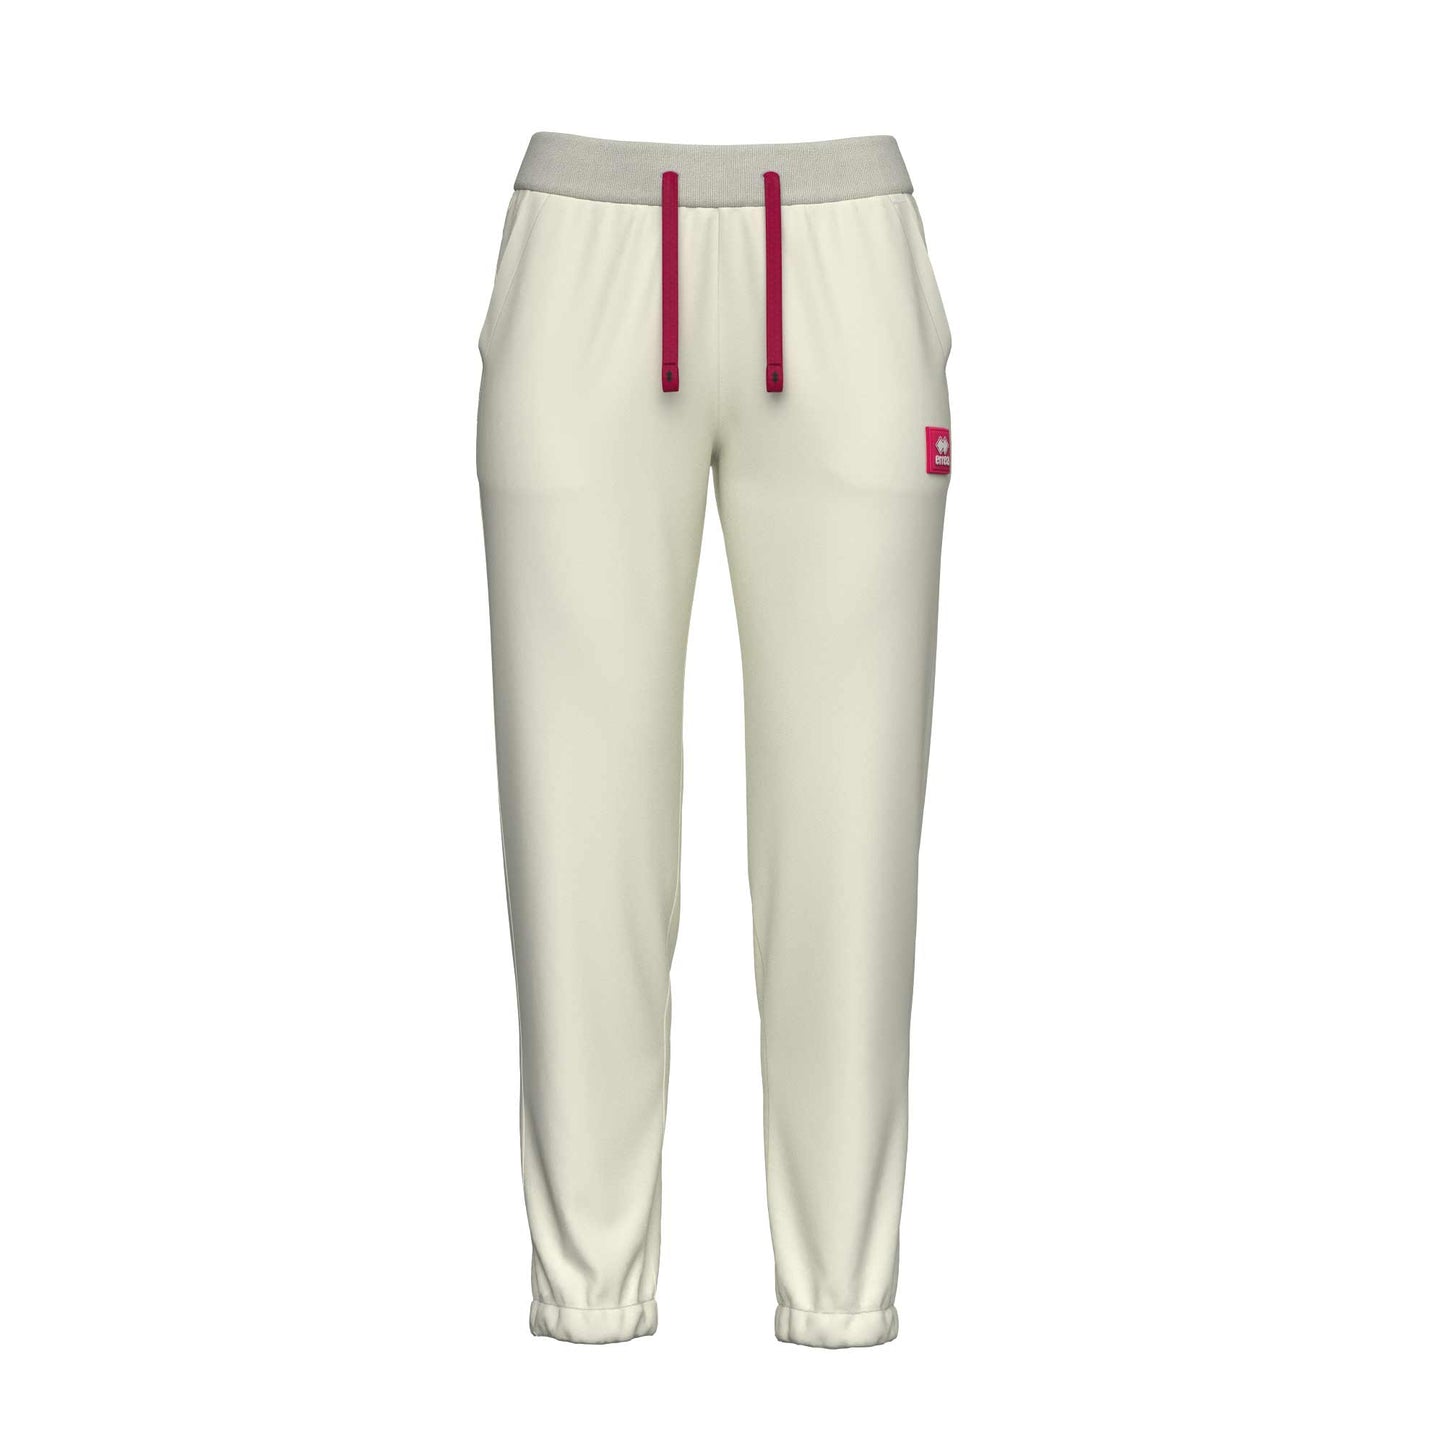 TECH PACK FW23/24 CUFFED PANT 04 WOMAN AD